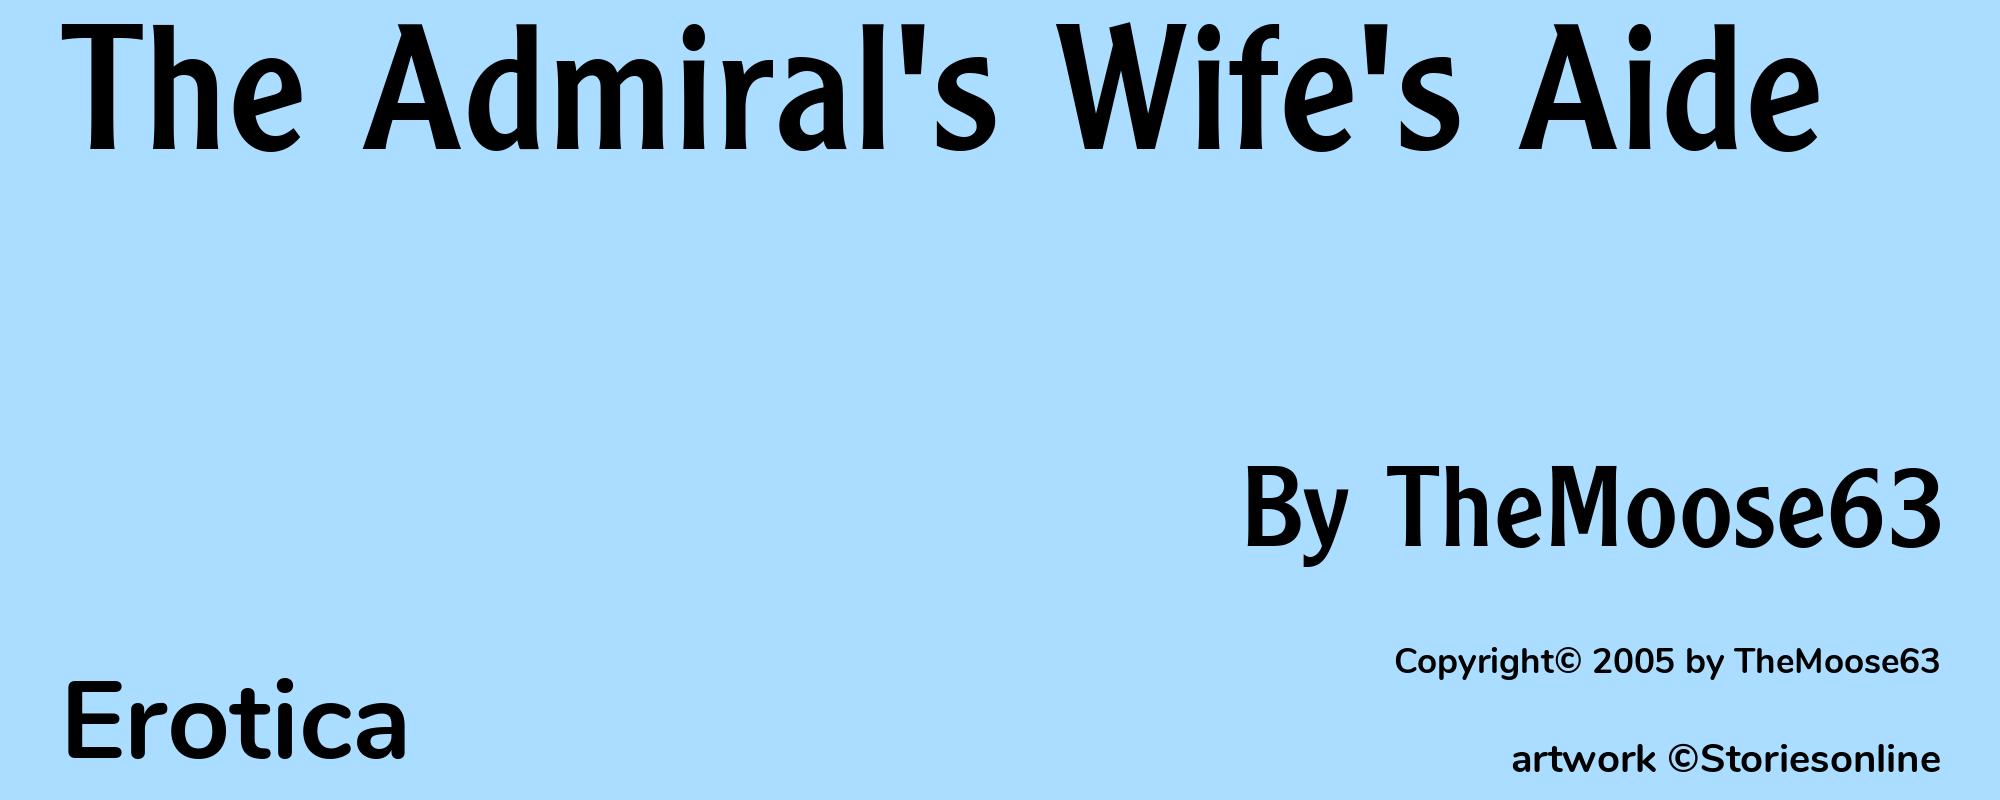 The Admiral's Wife's Aide - Cover